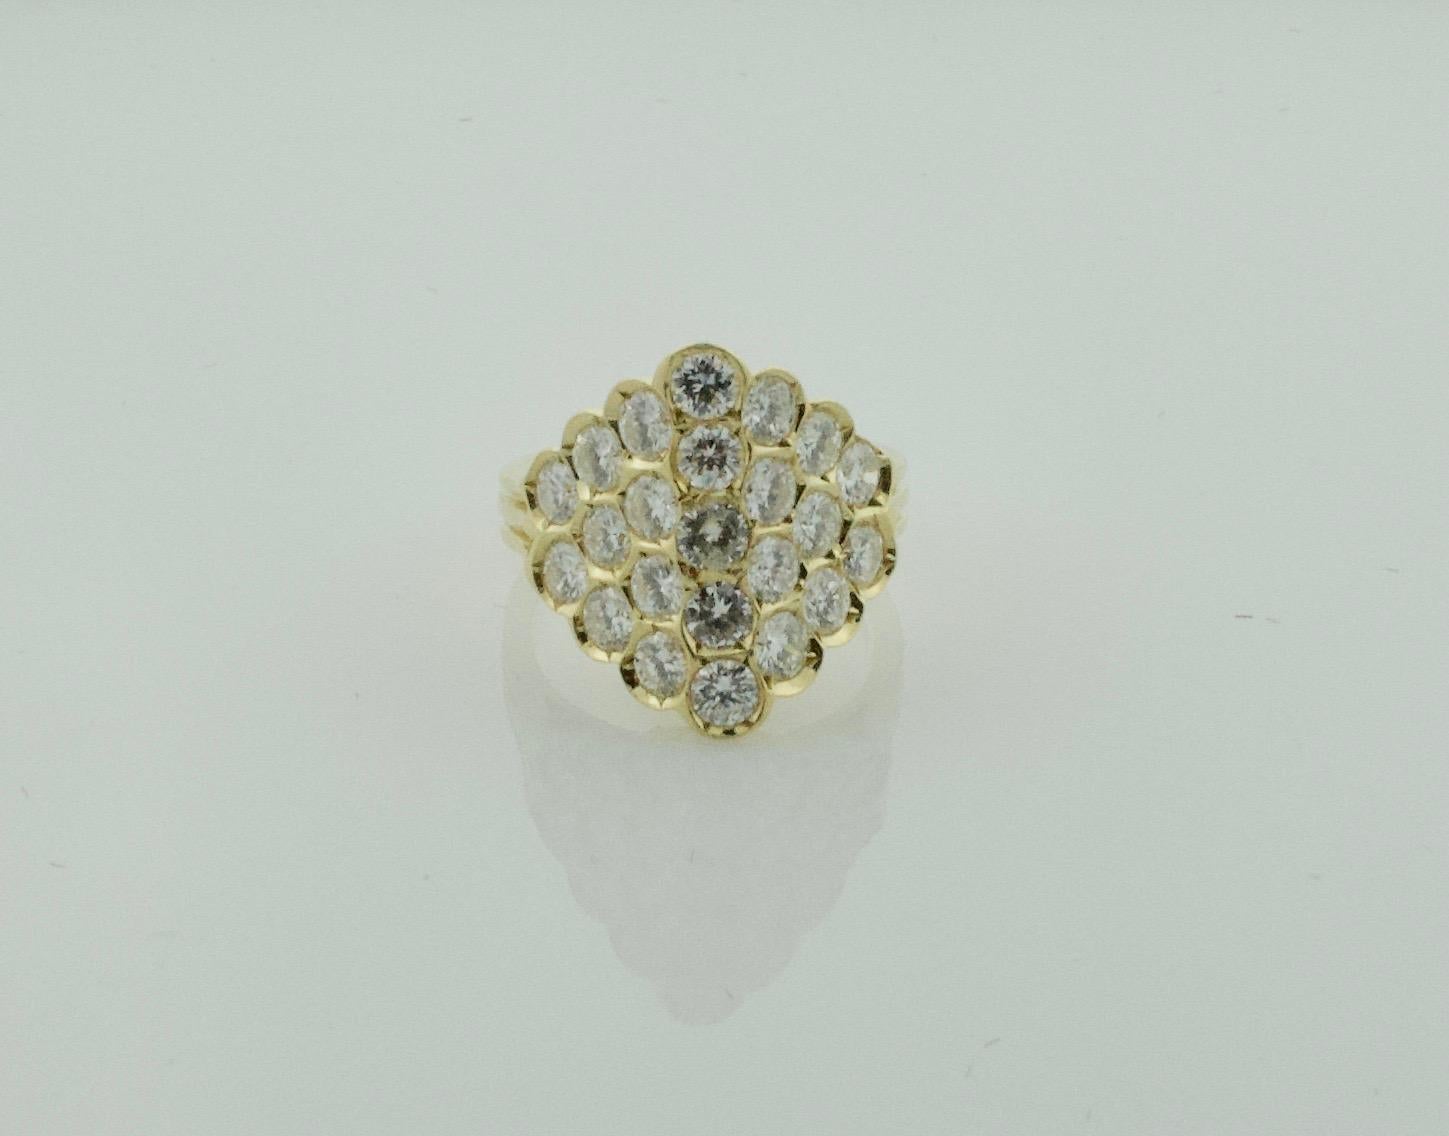 Delightful 18k Diamond Ring in Yellow Gold
23 Round Brilliant Cut Diamonds Weighing 2.15 Carats Approximately [GH VVS]
Currently Size 4.5 Can Easily Sized By Us or Your Qualified Jeweler